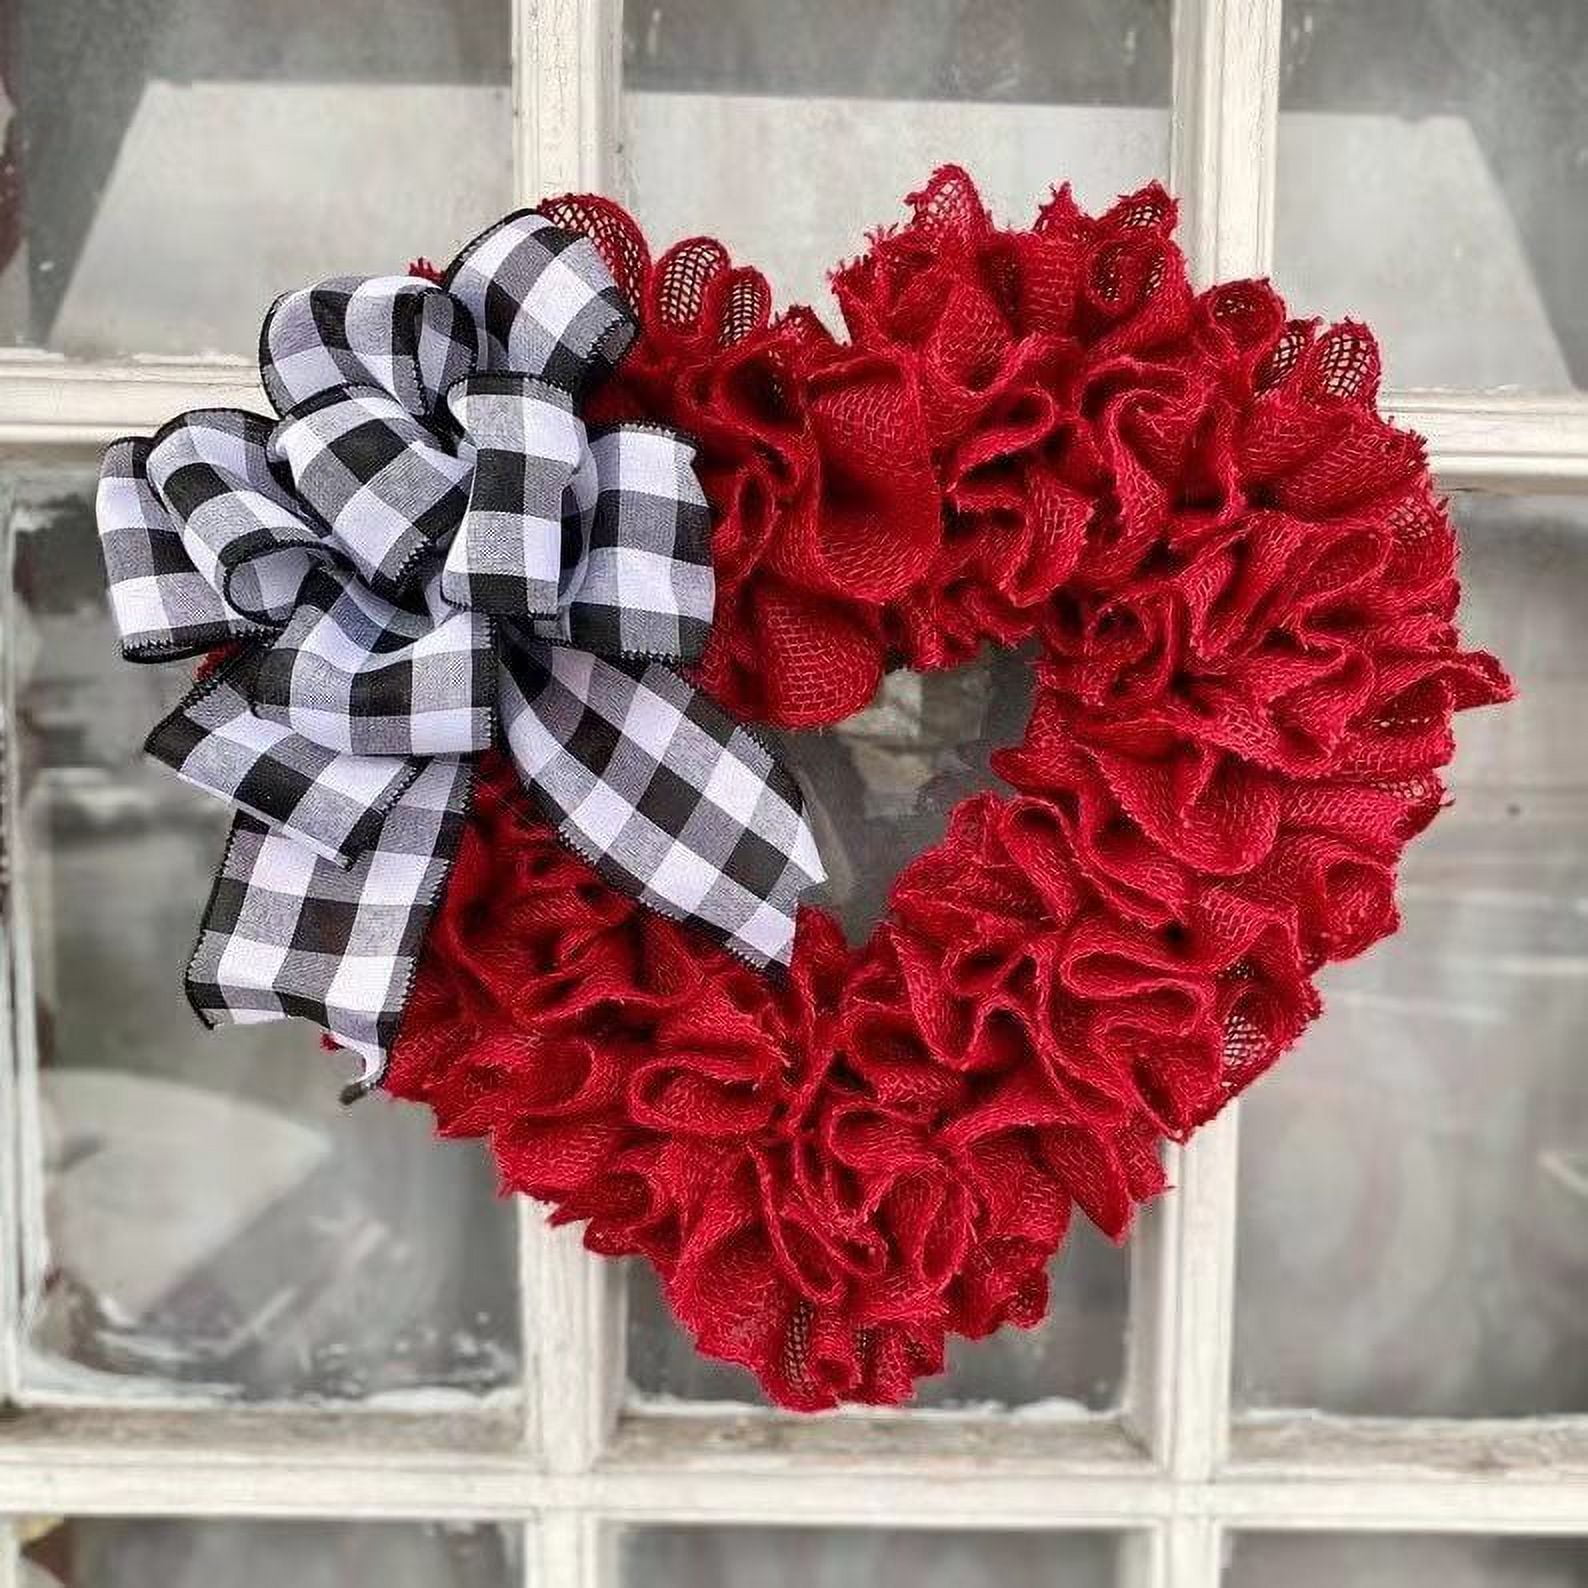 Dollar Store Peony Heart Wreath for Valentine's Day through Spring